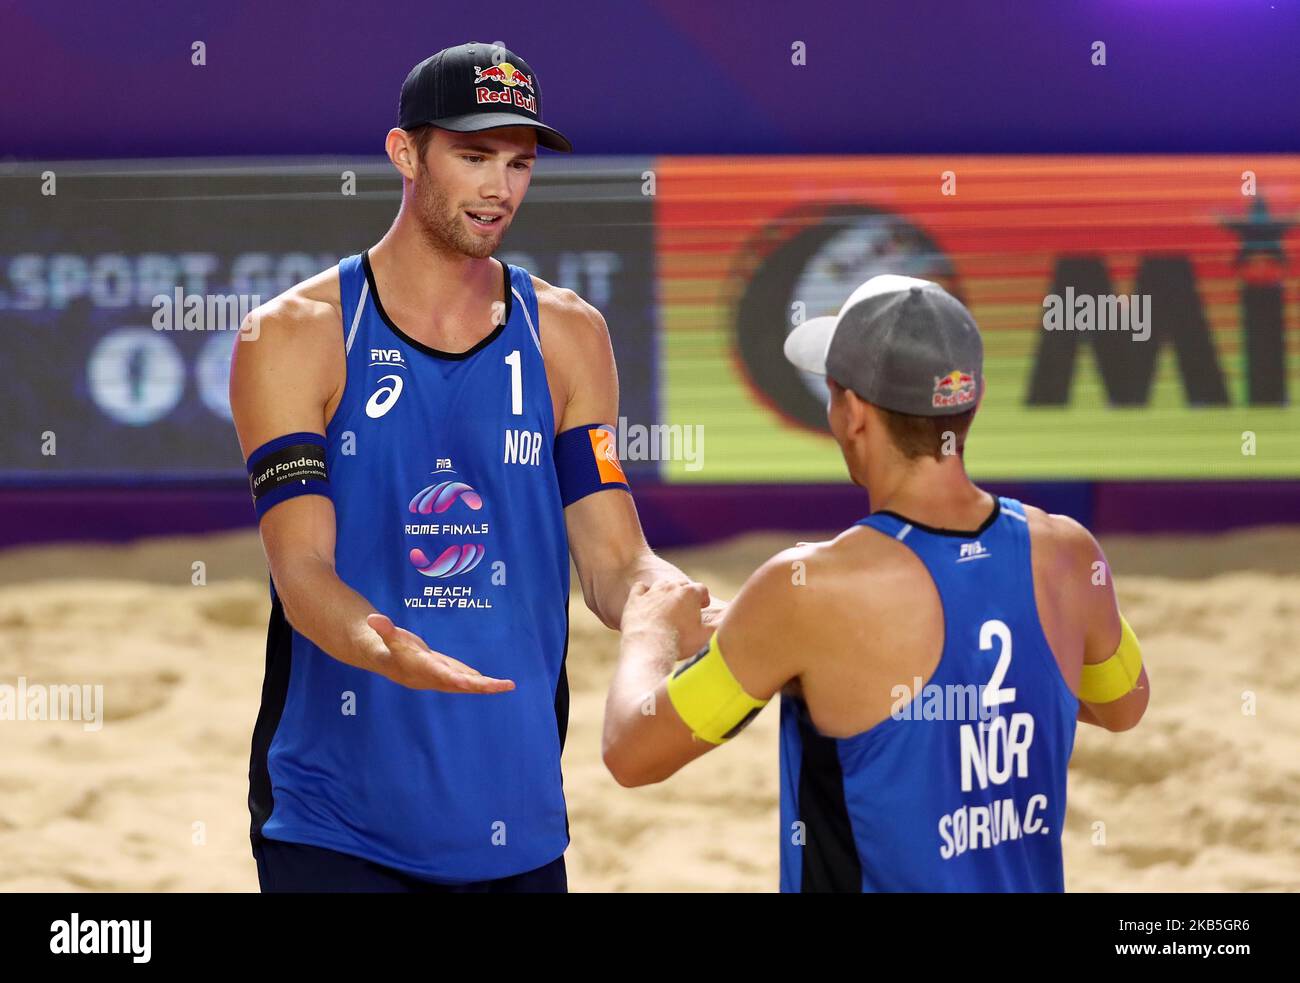 Anders Bernsten Mol and Christian Sandlie Sorum (NOR) celebrate at the end of the 3rd place final match at Beach Volley Rome World Tour Finals. Foro Italico in Rome, Italy on September 8, 2019 (Photo by Matteo Ciambelli/NurPhoto) Stock Photo